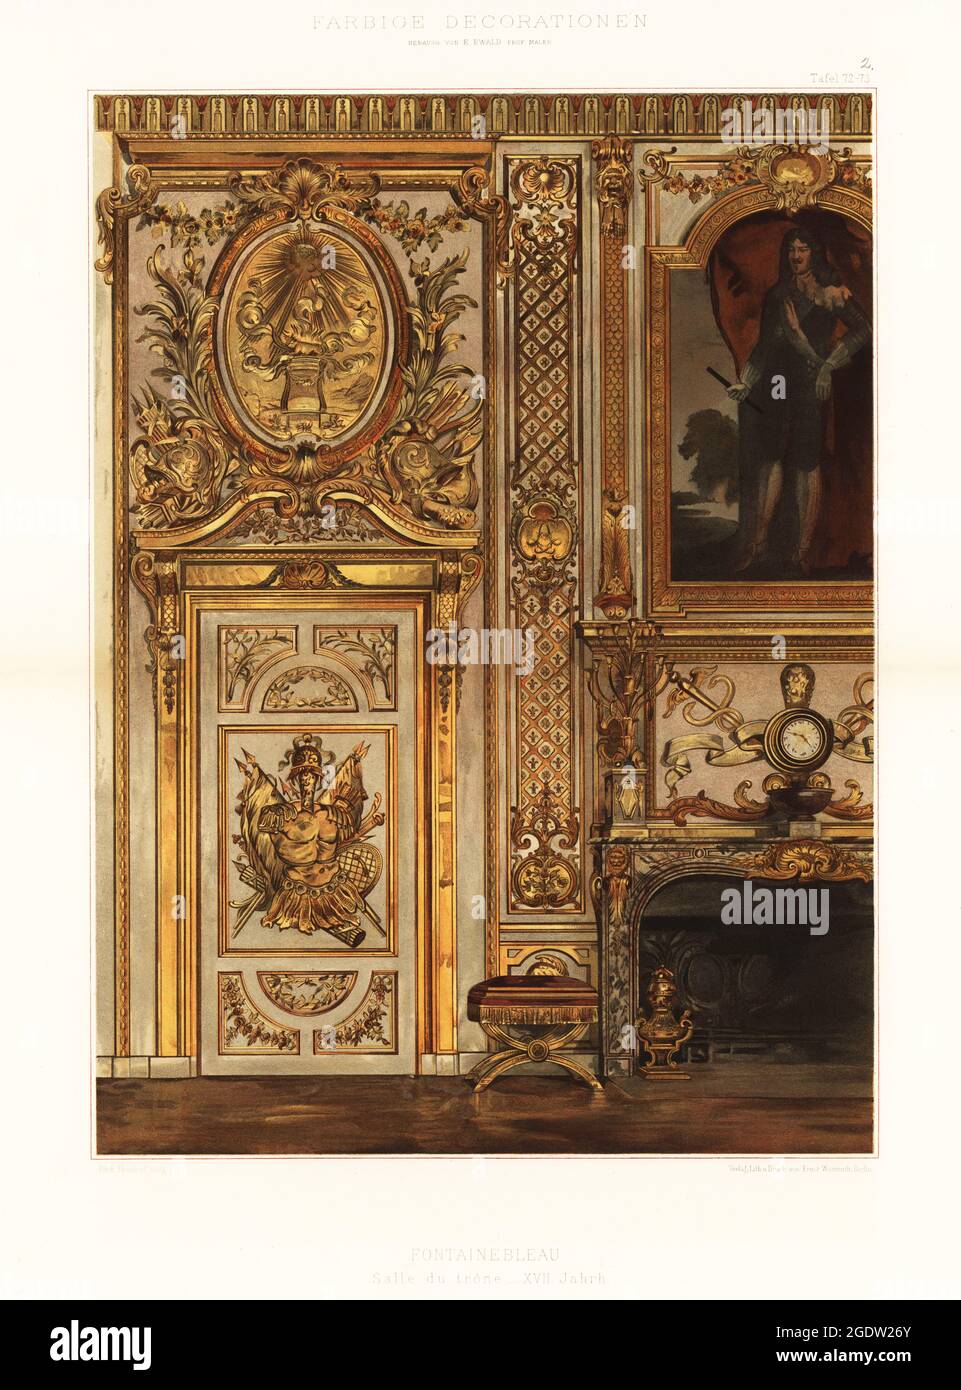 Throne room in the Palace of Fontainebleau, 17th century. Salle du trone, Chateau de Fontainebleau, XVII Jahrh. Chromolithograph by Richard Hendorf from Ernst Ewald’s Farbige decorationen, alter und never Zeit (Color decoration, ancient and new eras), Ernst Wasmuth, Berlin, 1889. Stock Photo